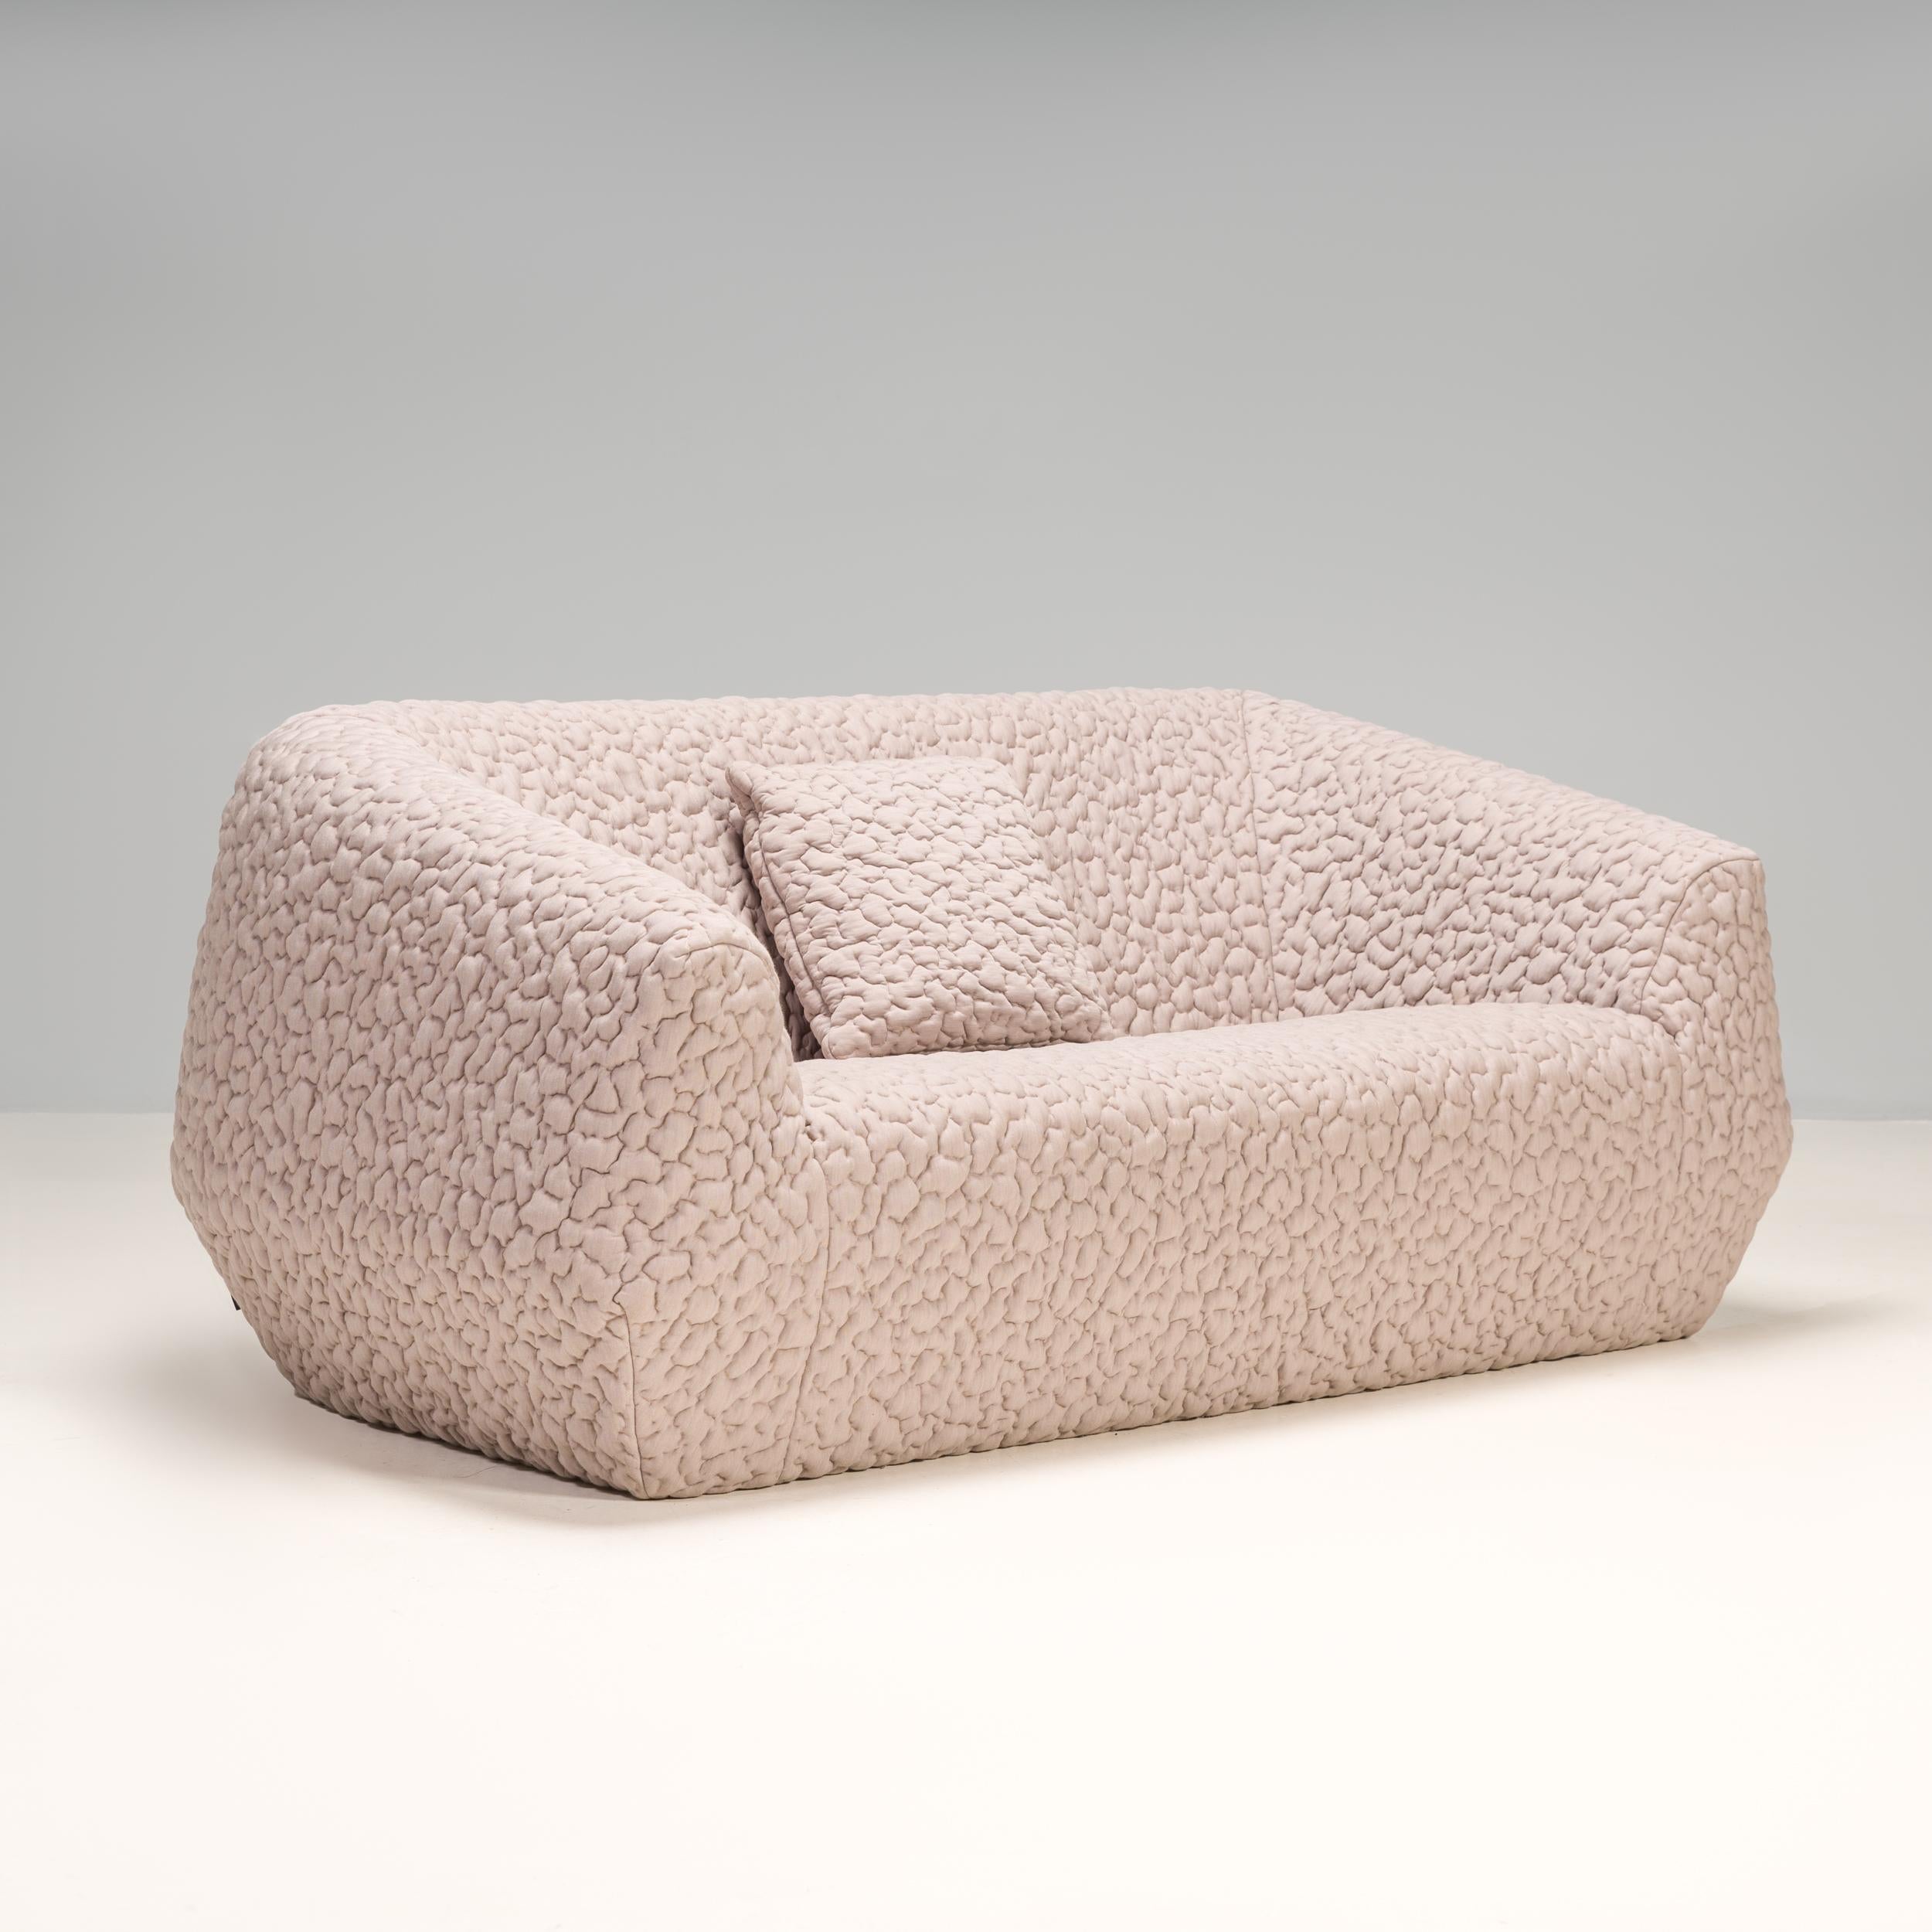 Originally designed by Marie C Domer for Ligne Roset in 2018, the Uncover sofa is a fantastic example of modern design.

Constructed from layers of foam in varying densities, the sofa has a sculpted yet comfortable form, while the medium size is